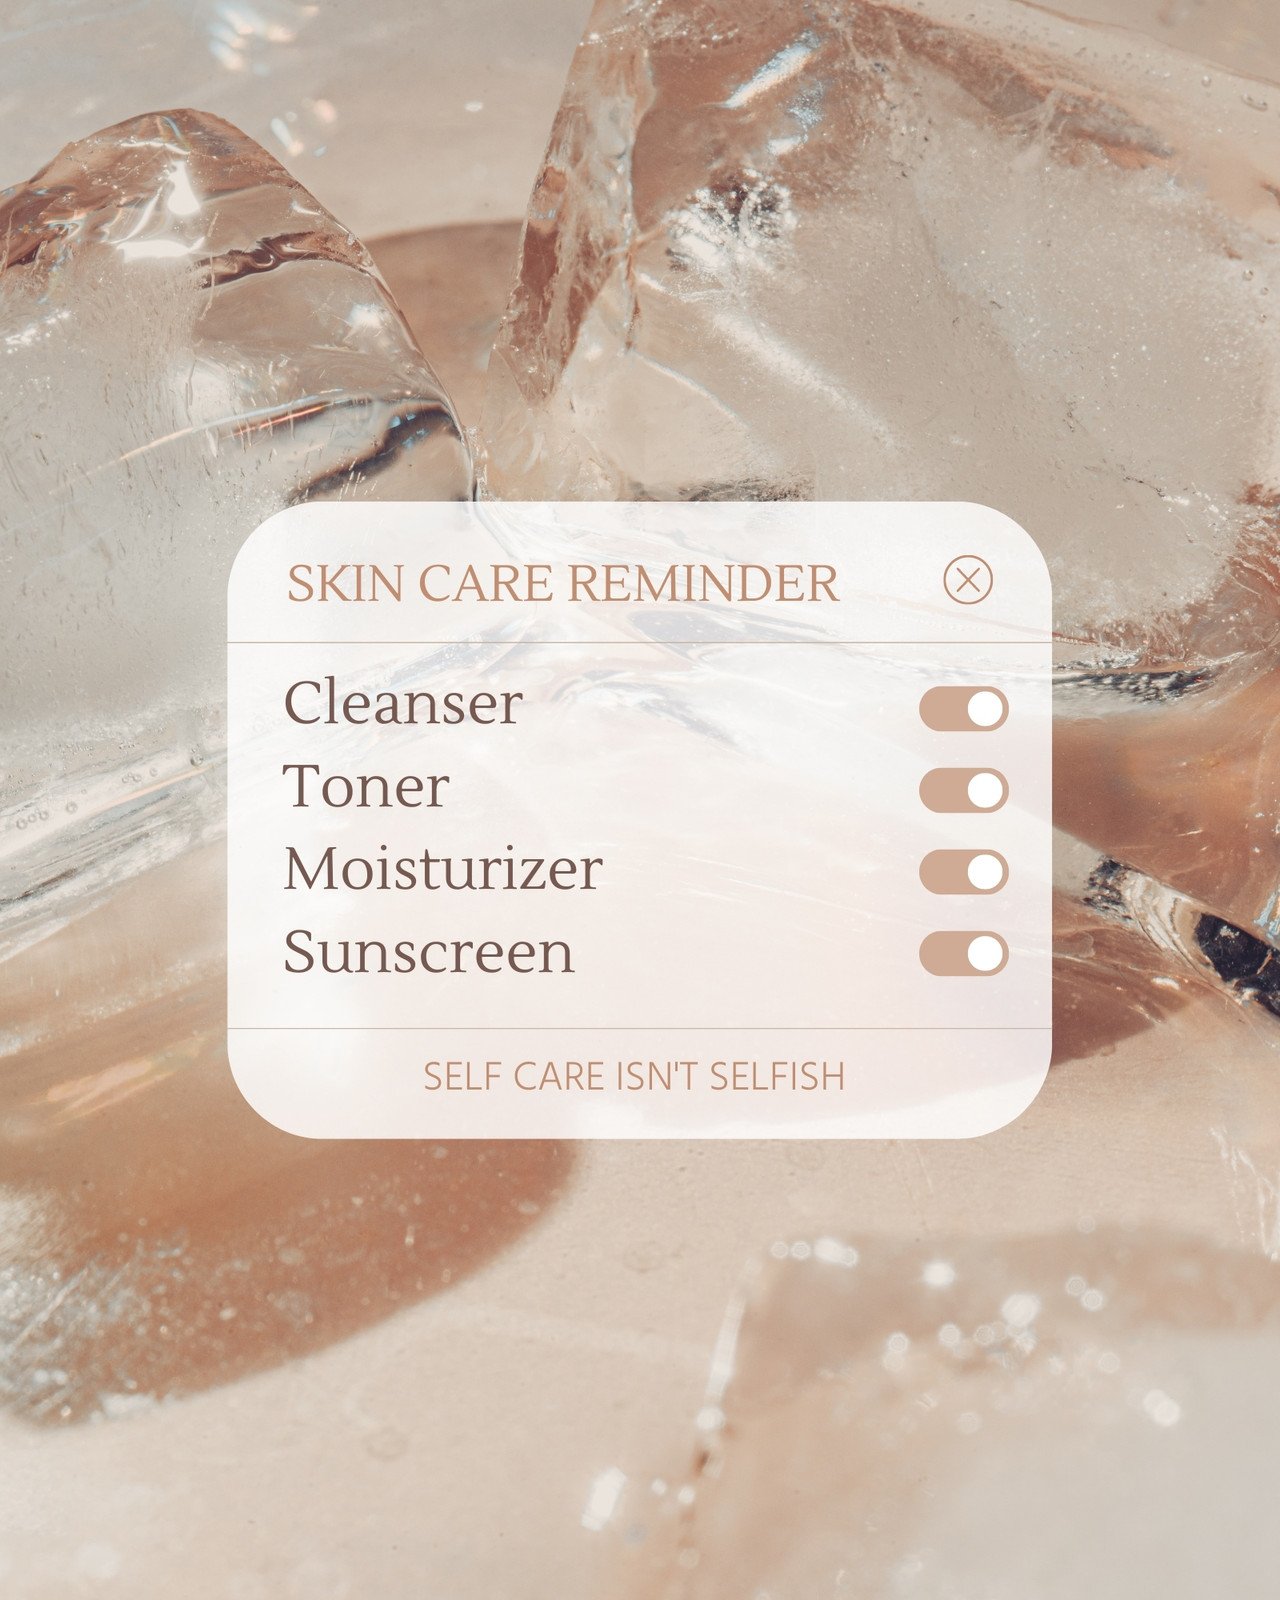 Free and customizable skin care templates